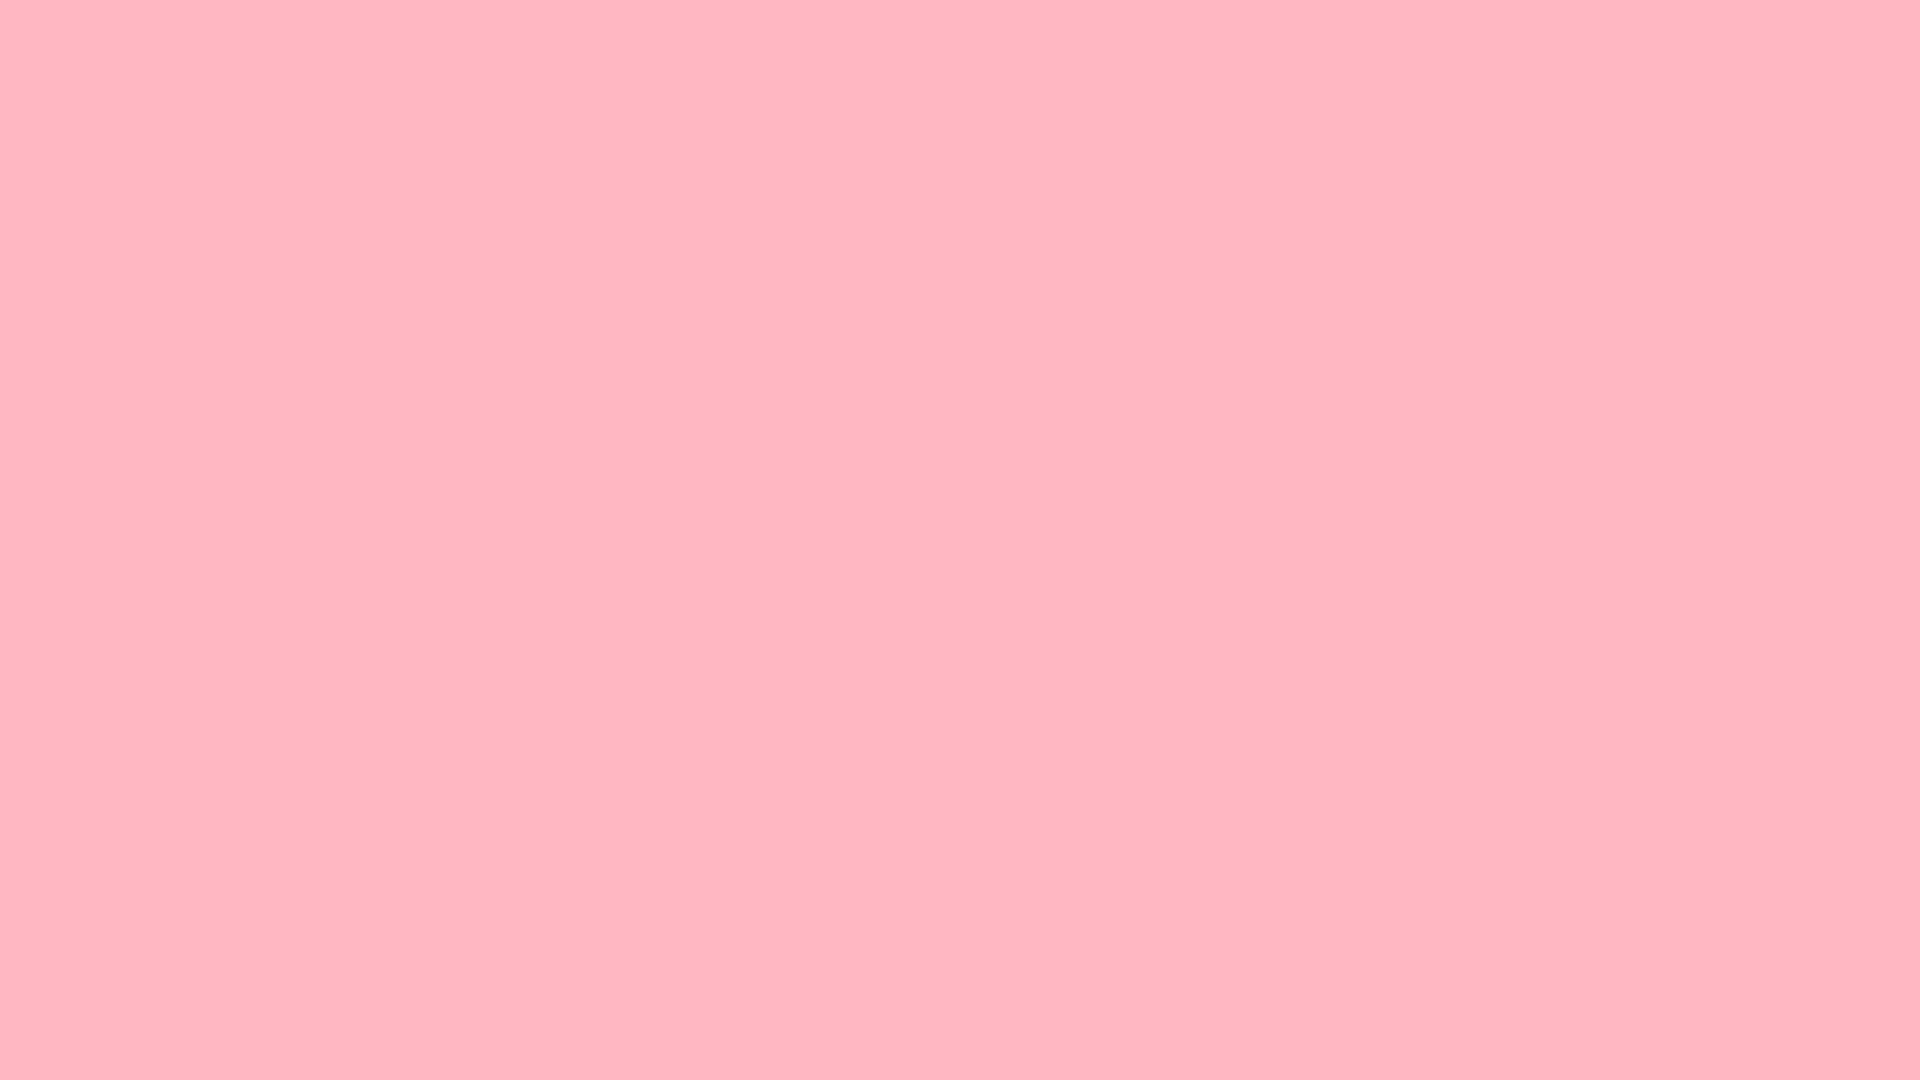 Caption: Abstract Pink Blank Template Background Wallpaper